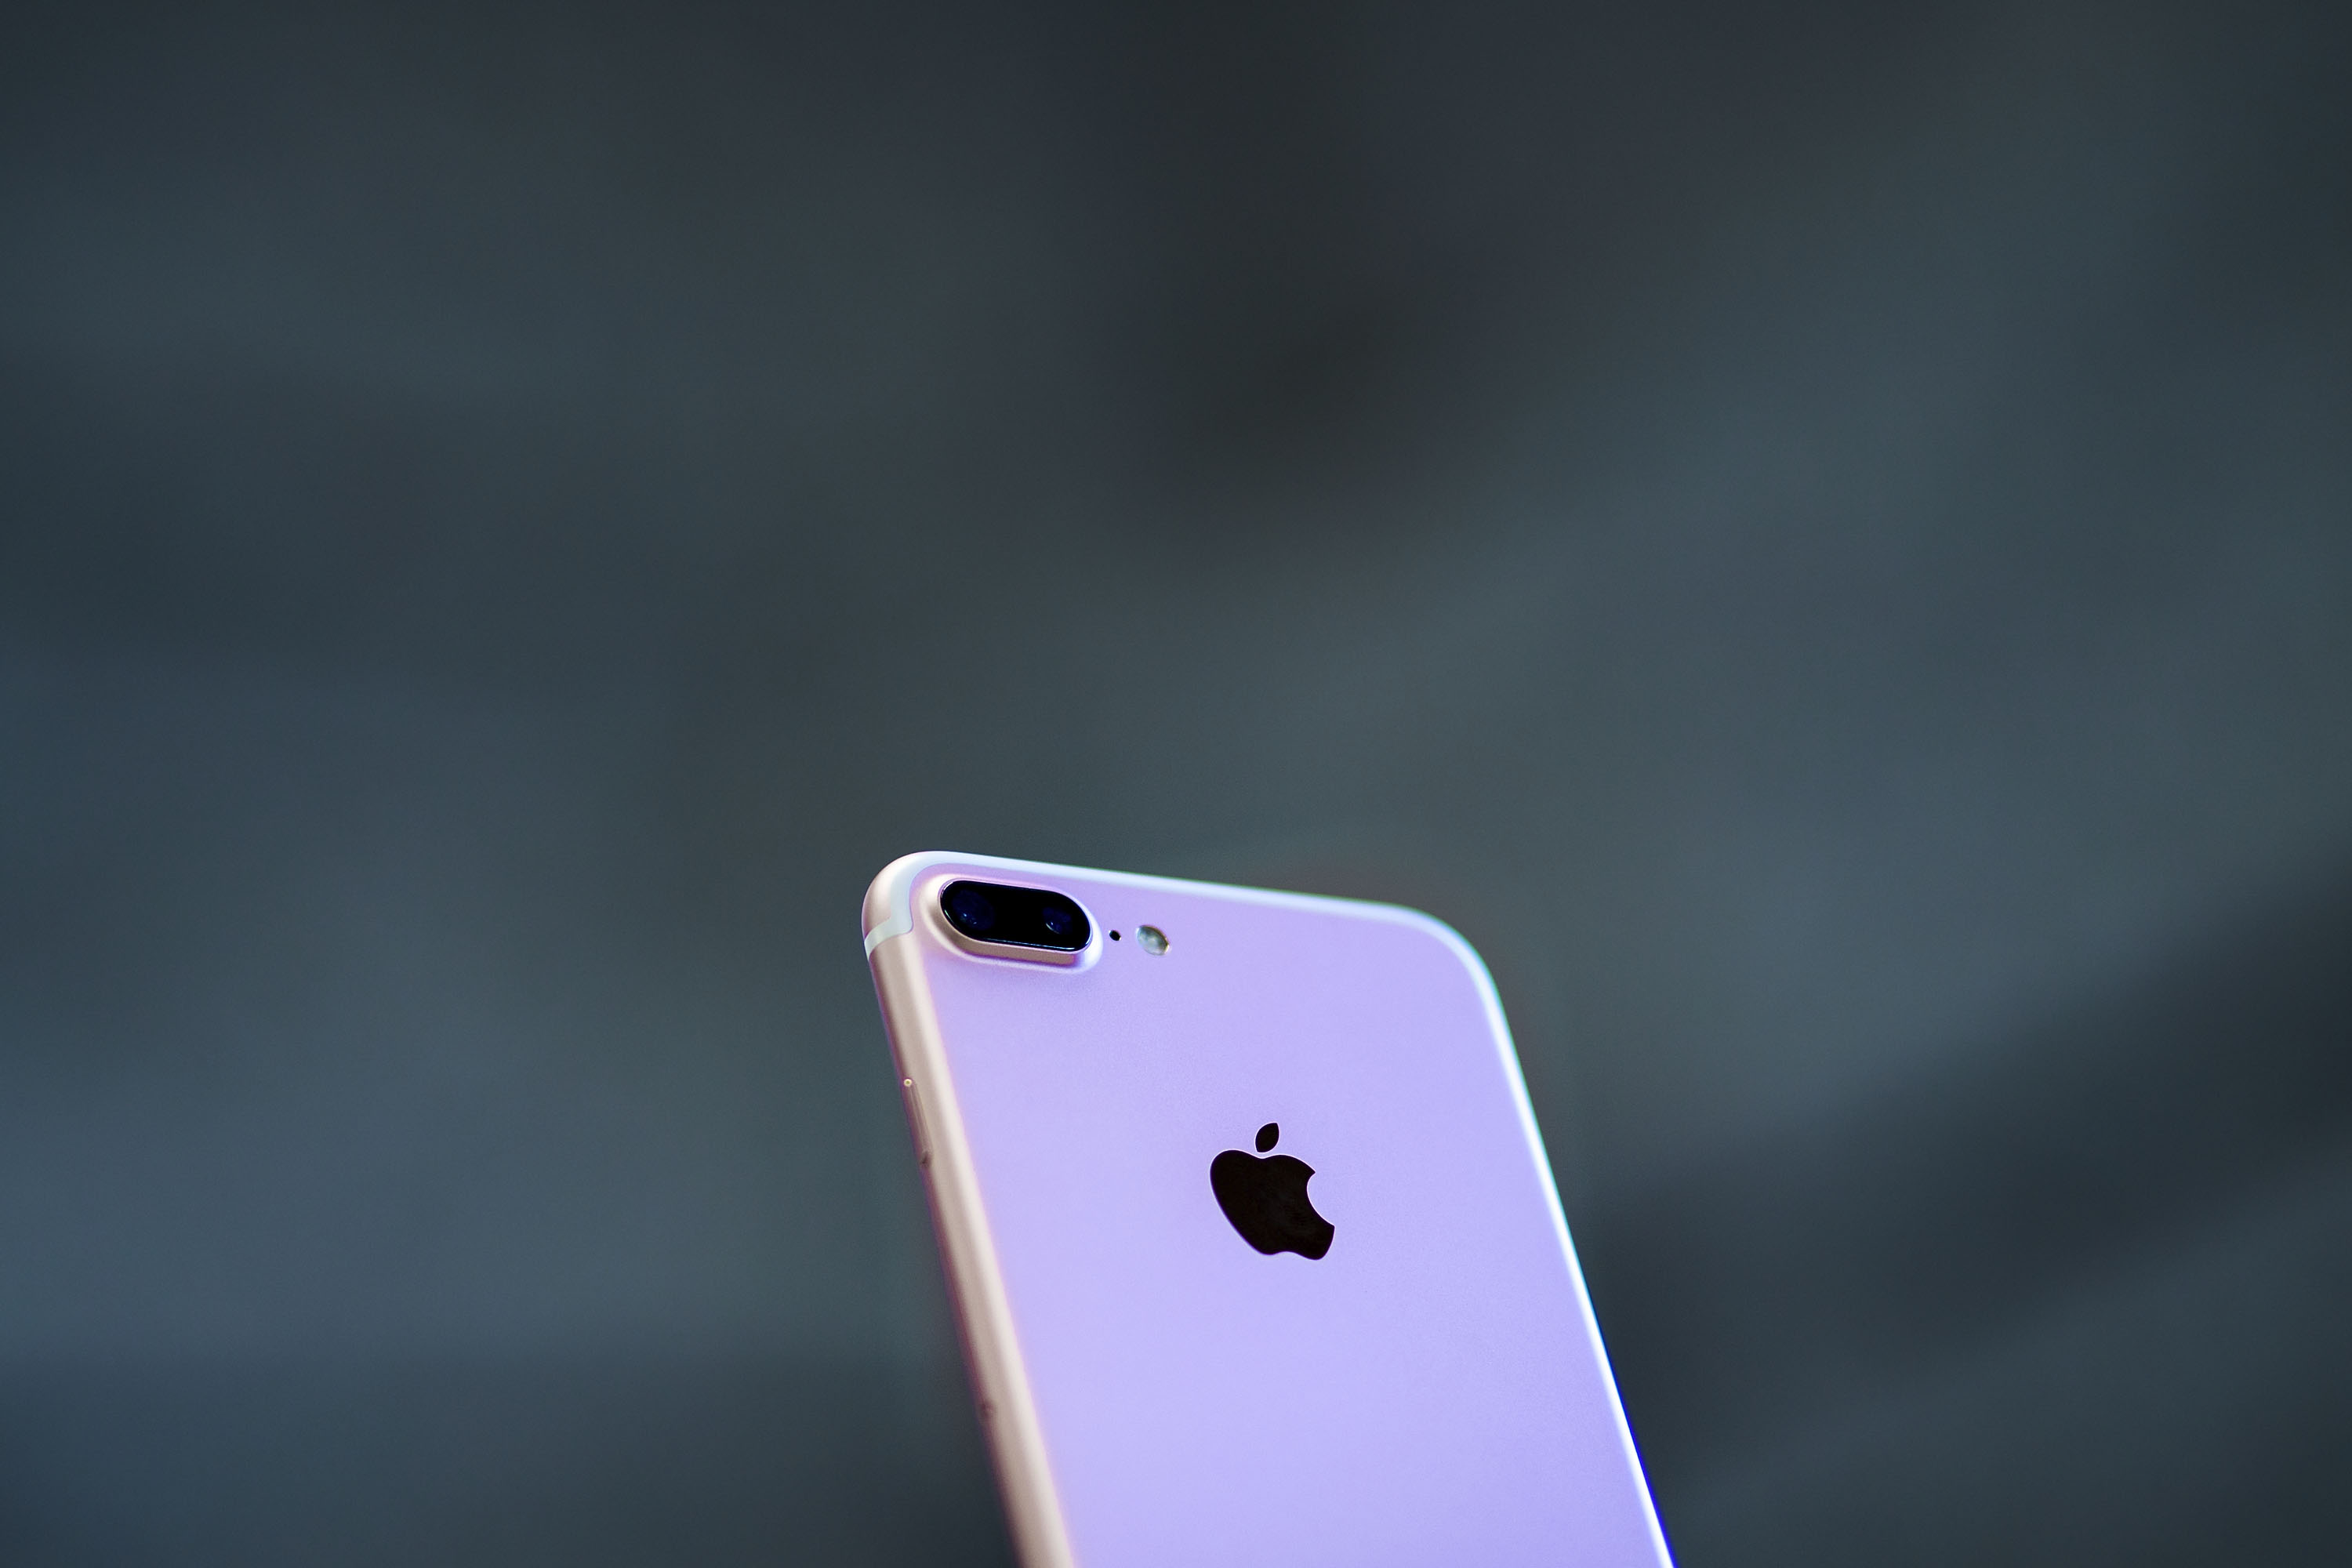 MADRID, SPAIN - SEPTEMBER, 16: An Iphone 7 Plus with its new dual camera is displayed at Puerta del Sol Apple Store the day the company launches their Iphone 7 and 7 Plus on September 16, 2016 in Madrid, Spain. The iPhone 7 and iPhone 7 Plus has been launched on Friday September 16th in more than 25 countries. Customers have started to queue 38 hours before the opening of the store placed in the center of Madrid.  (Photo by Gonzalo Arroyo Moreno/Getty Images) (Gonzalo Arroyo Moreno&mdash;Getty Images)